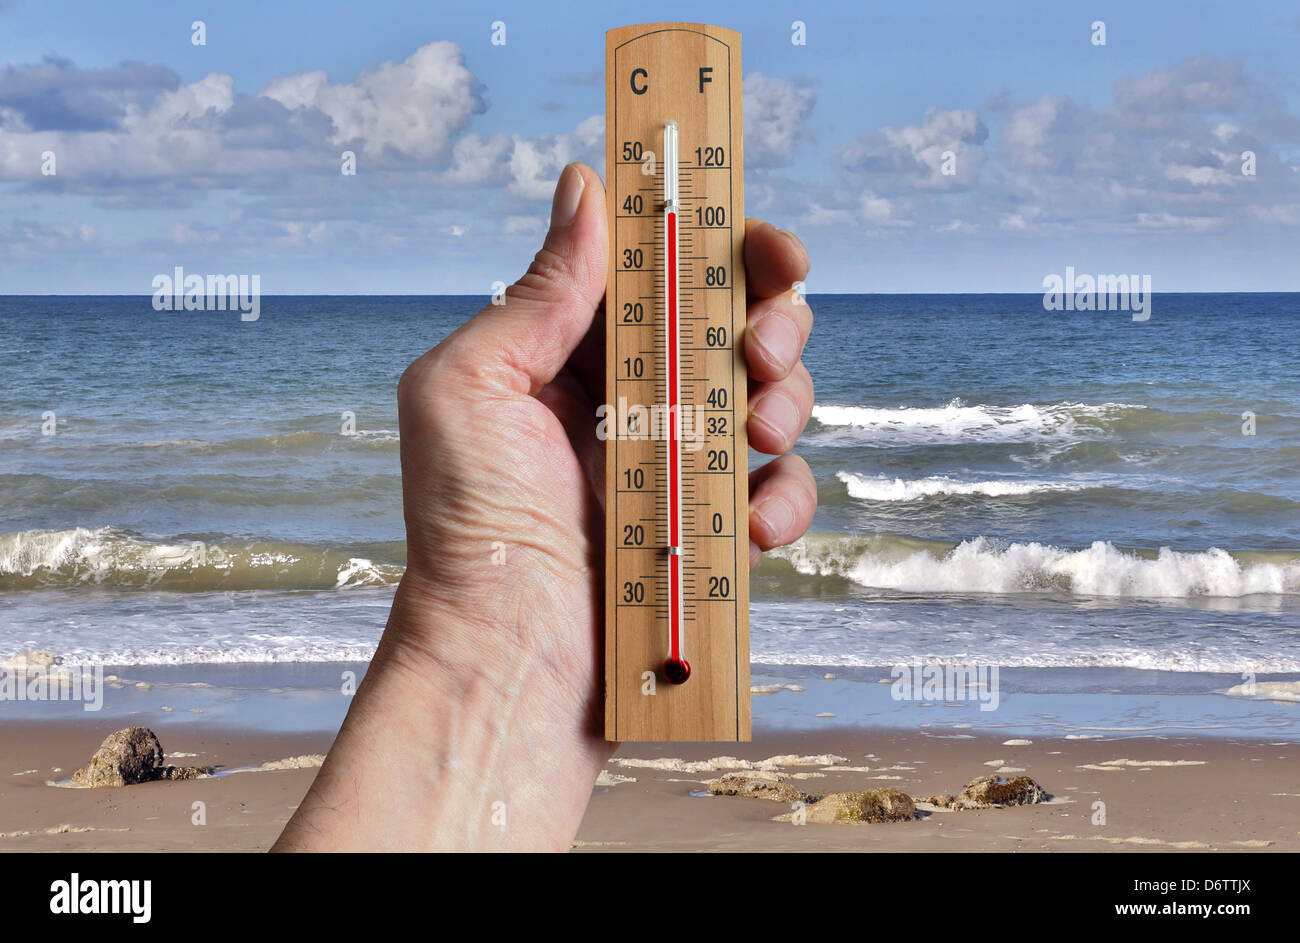 https://c8.alamy.com/comp/D6TTJX/hand-holding-a-thermometer-indicating-climate-change-due-to-increasing-D6TTJX.jpg